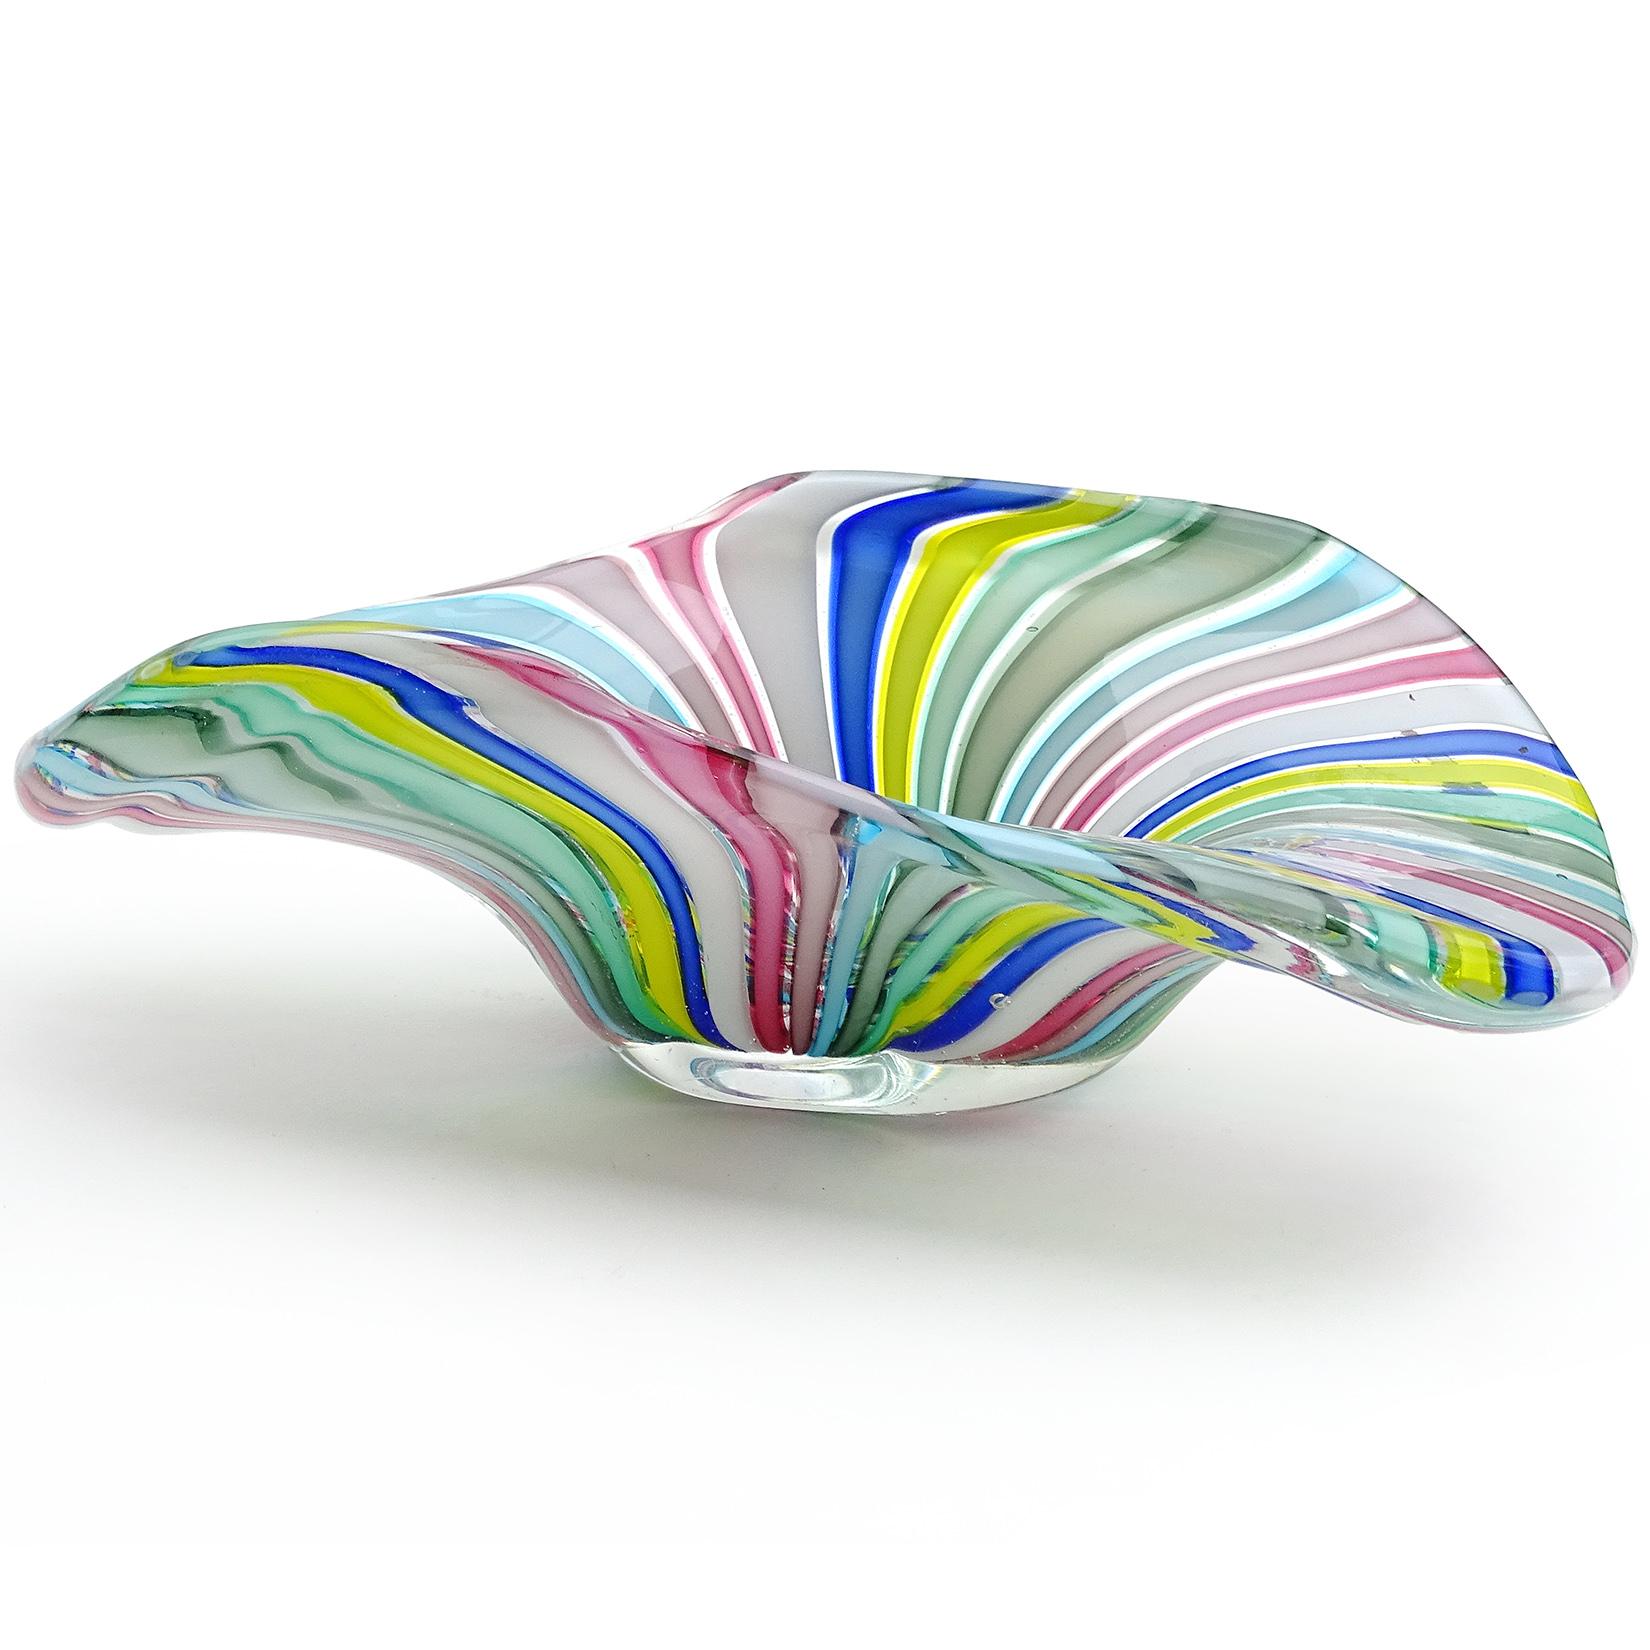 Colorful Murano handblown rainbow Filigrana ribbons Italian art glass bowl. Documented to designer Fratelli Toso. It has an organic shape, with white, cobalt blue, yellow, teal, pink, soft pink, gray and light blue colors. Great statement on any